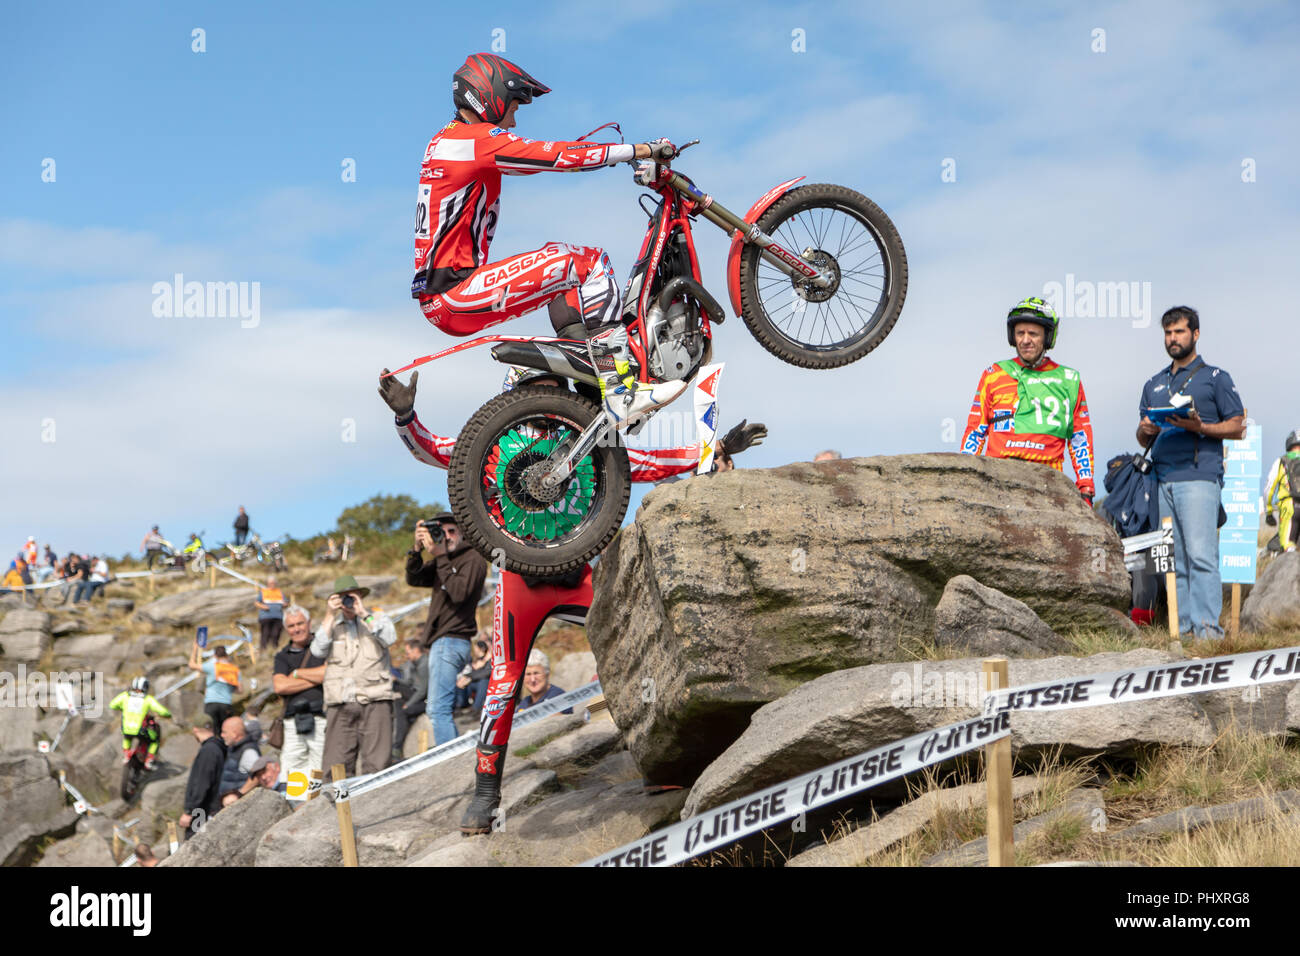 Silsden, UK. 2nd September 2018. The best International riders contest the British round of The World Trials GP. Results - First Place - Toni Bou. Second - Adam Raga. Third - Miquel Gelabert. Fourth - Takahisa Fujinami. Credit: RHB/Alamy Live News Stock Photo